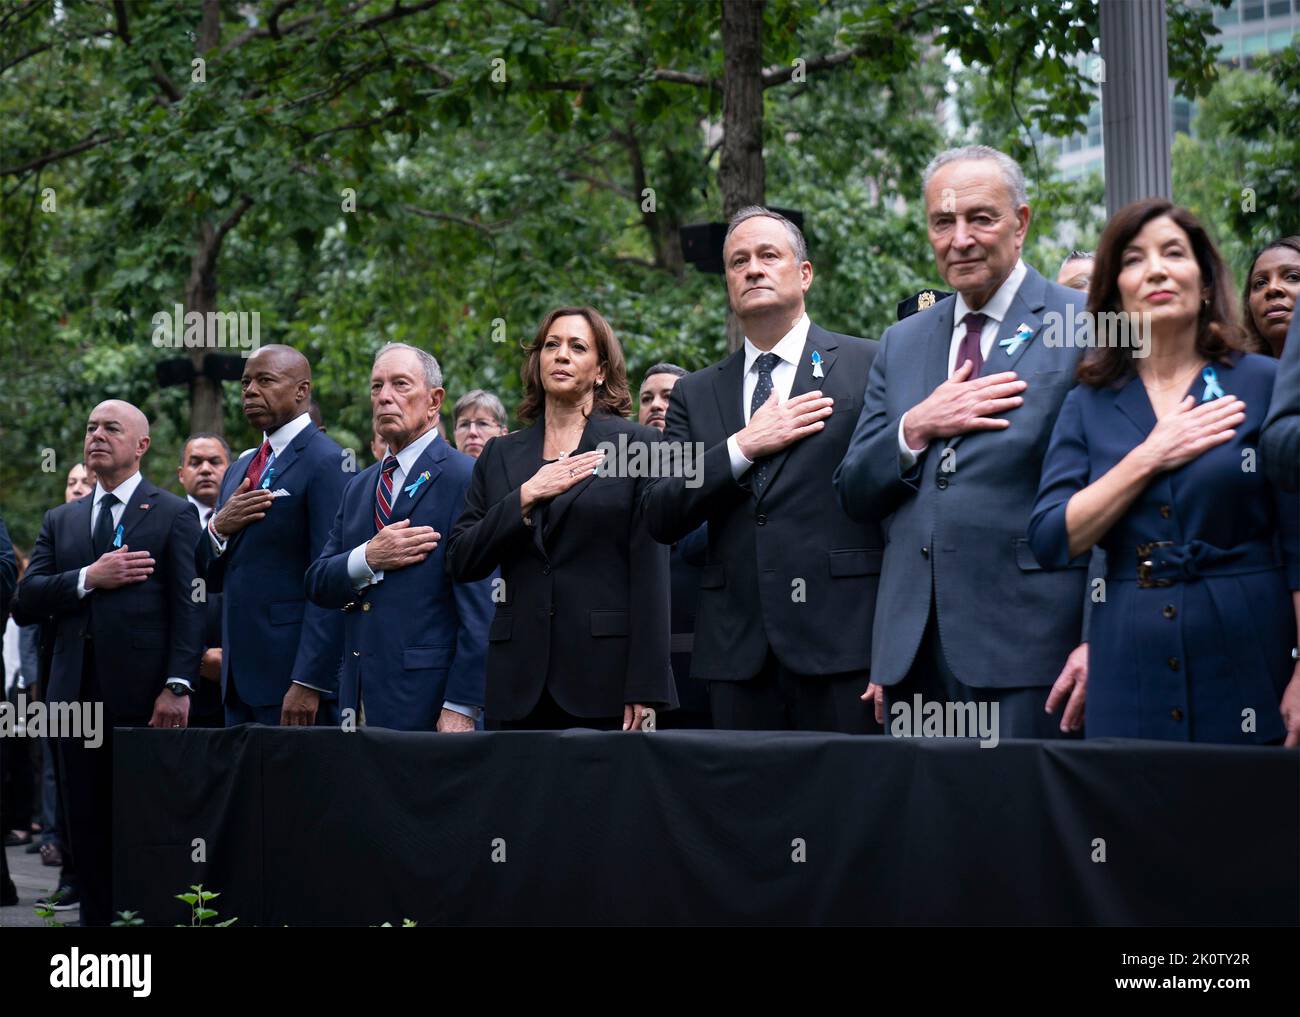 New York, United States of America. 11 September, 2022. U.S Vice President Kamala Harris, center, stands during a moment of silence at the ceremony remembering the victims of the 9/11 attacks at the National September 11 Memorial Museum, September 11, 2022 in New York City. Standing left to right are: Homeland Security Secretary Alejandro Mayorkas, Mayor Eric Adams, former Mayor Michael Bloomberg, Vice President Kamala Harris, Second Gentleman Doug Emhoff, Senate Majority Leader Chuck Schumer and Gov. Kathy Hochul.  Credit: Lawrence Jackson/White House Photo/Alamy Live News Stock Photo